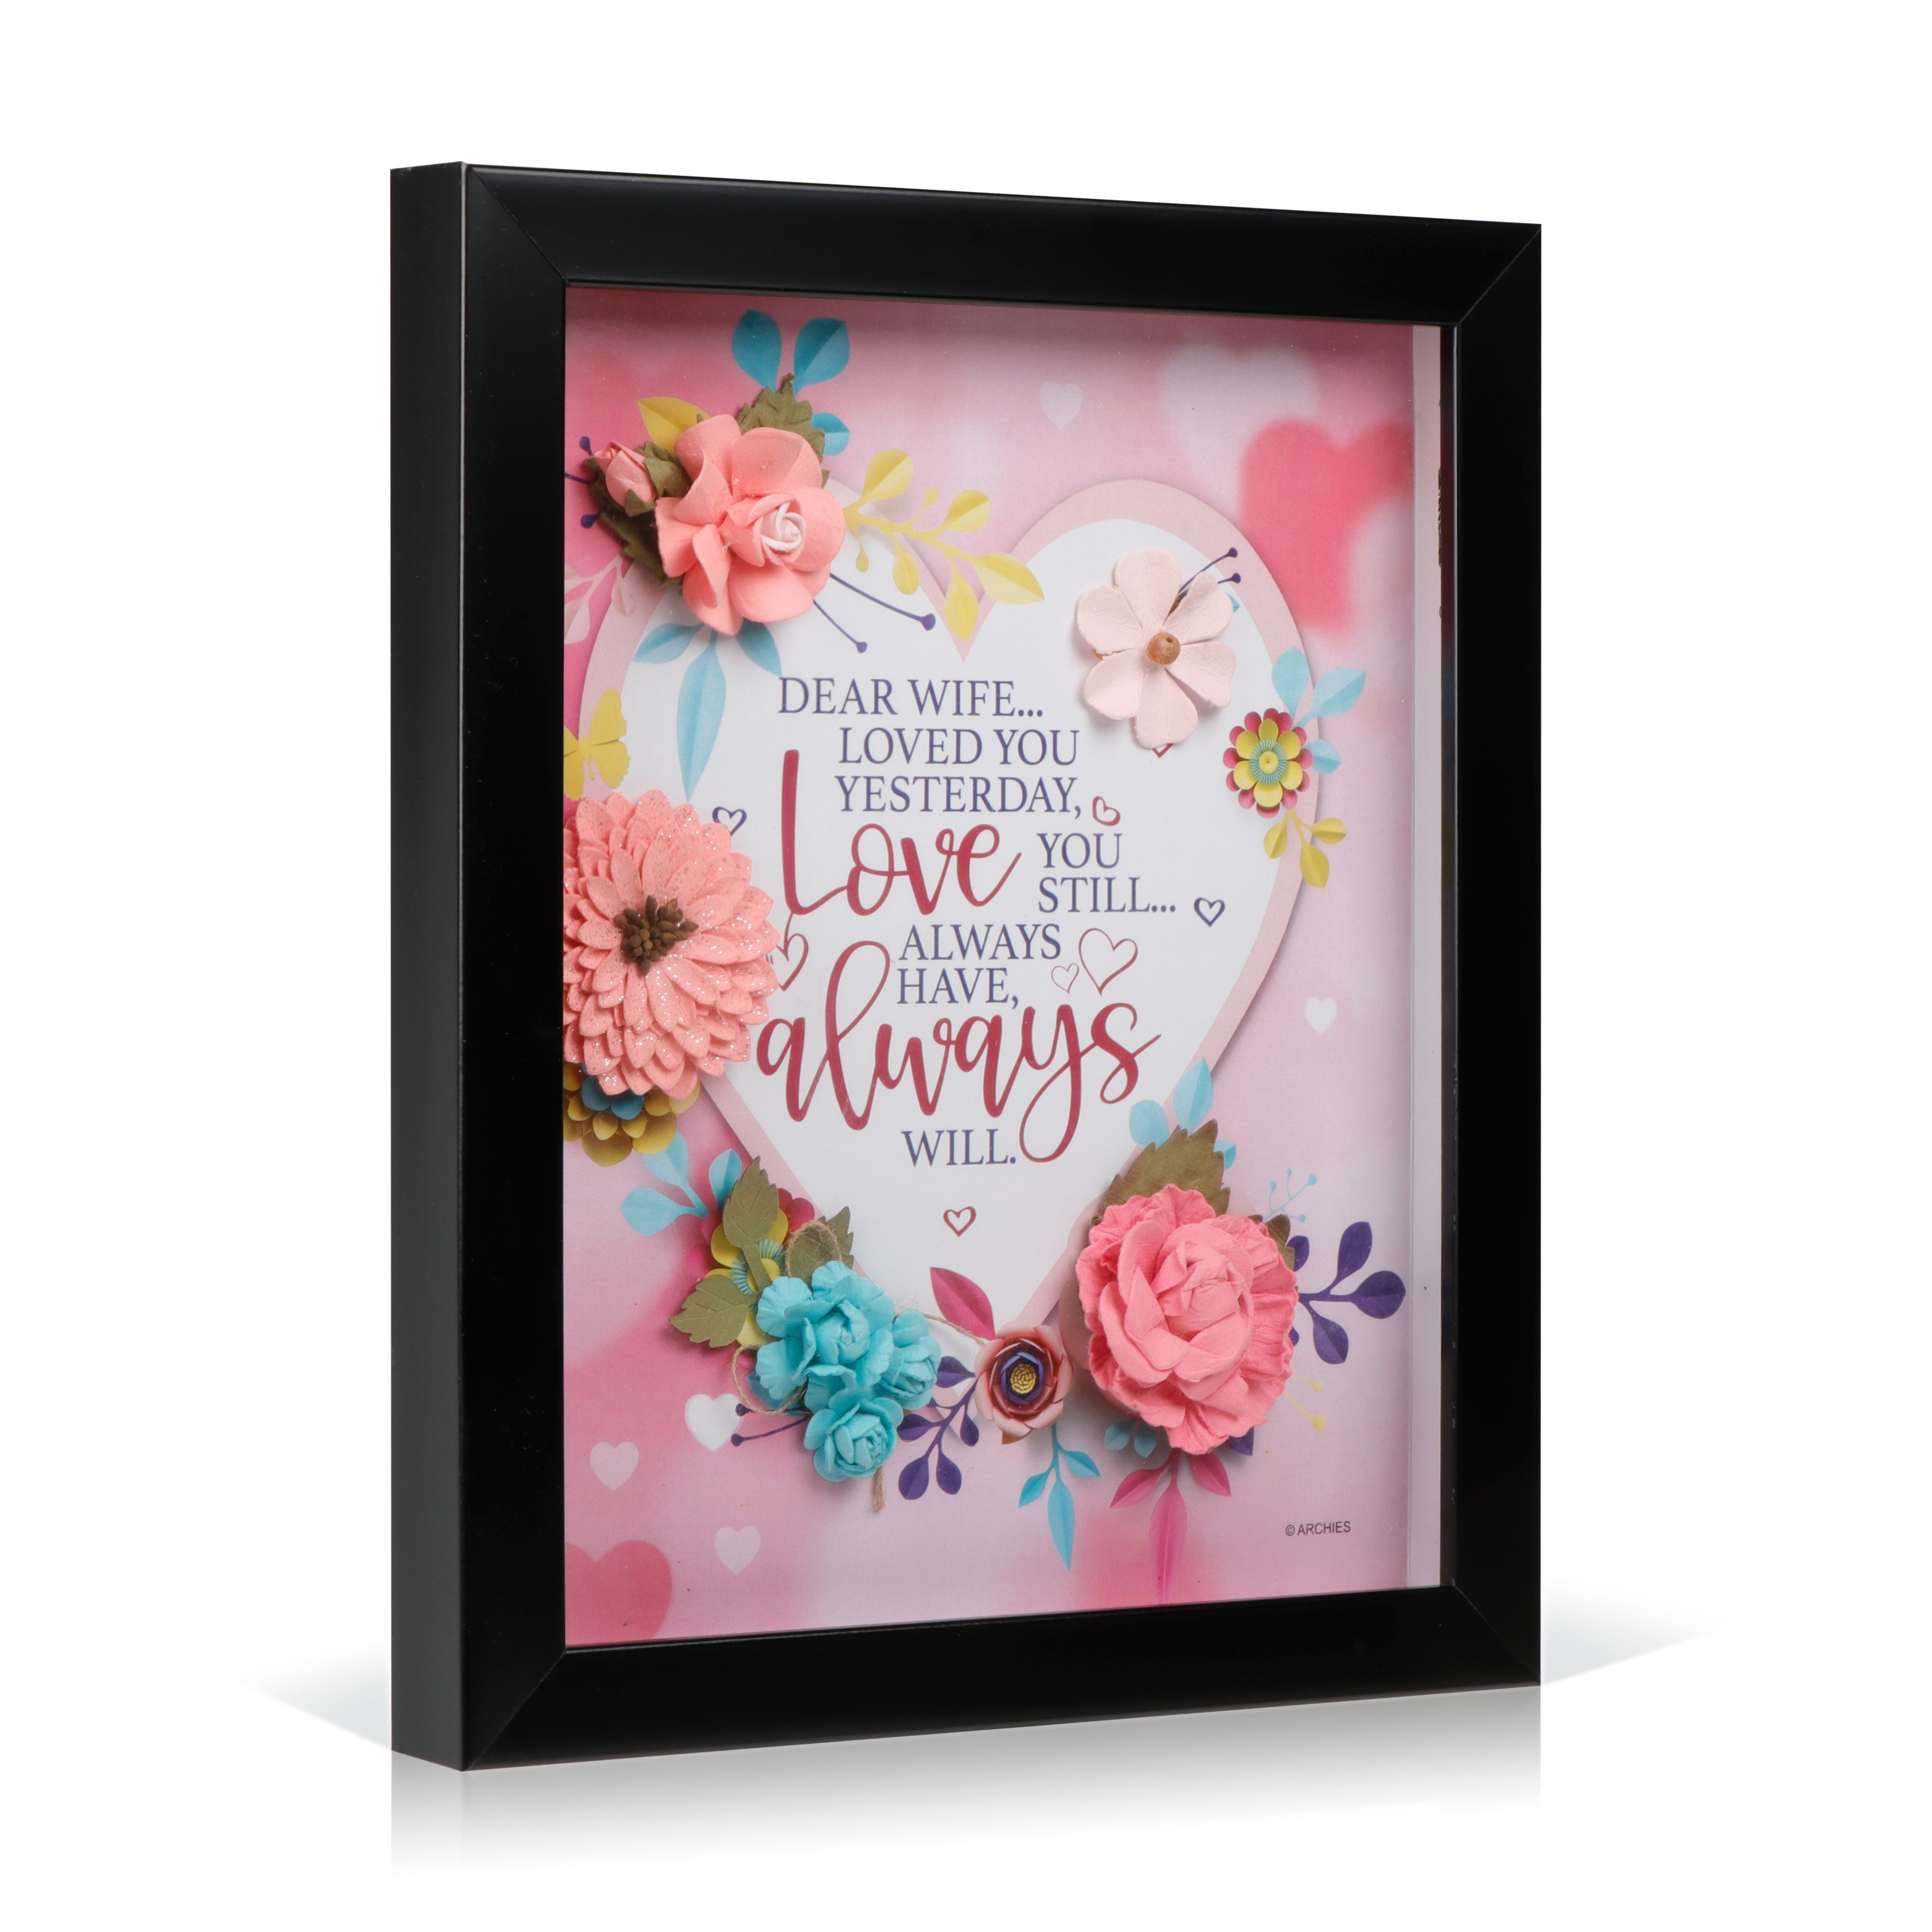 Archies | Archies KEEPSAKE QUOTATION - DEAR WIFE LOVED ..... For gifting and Home décor 2